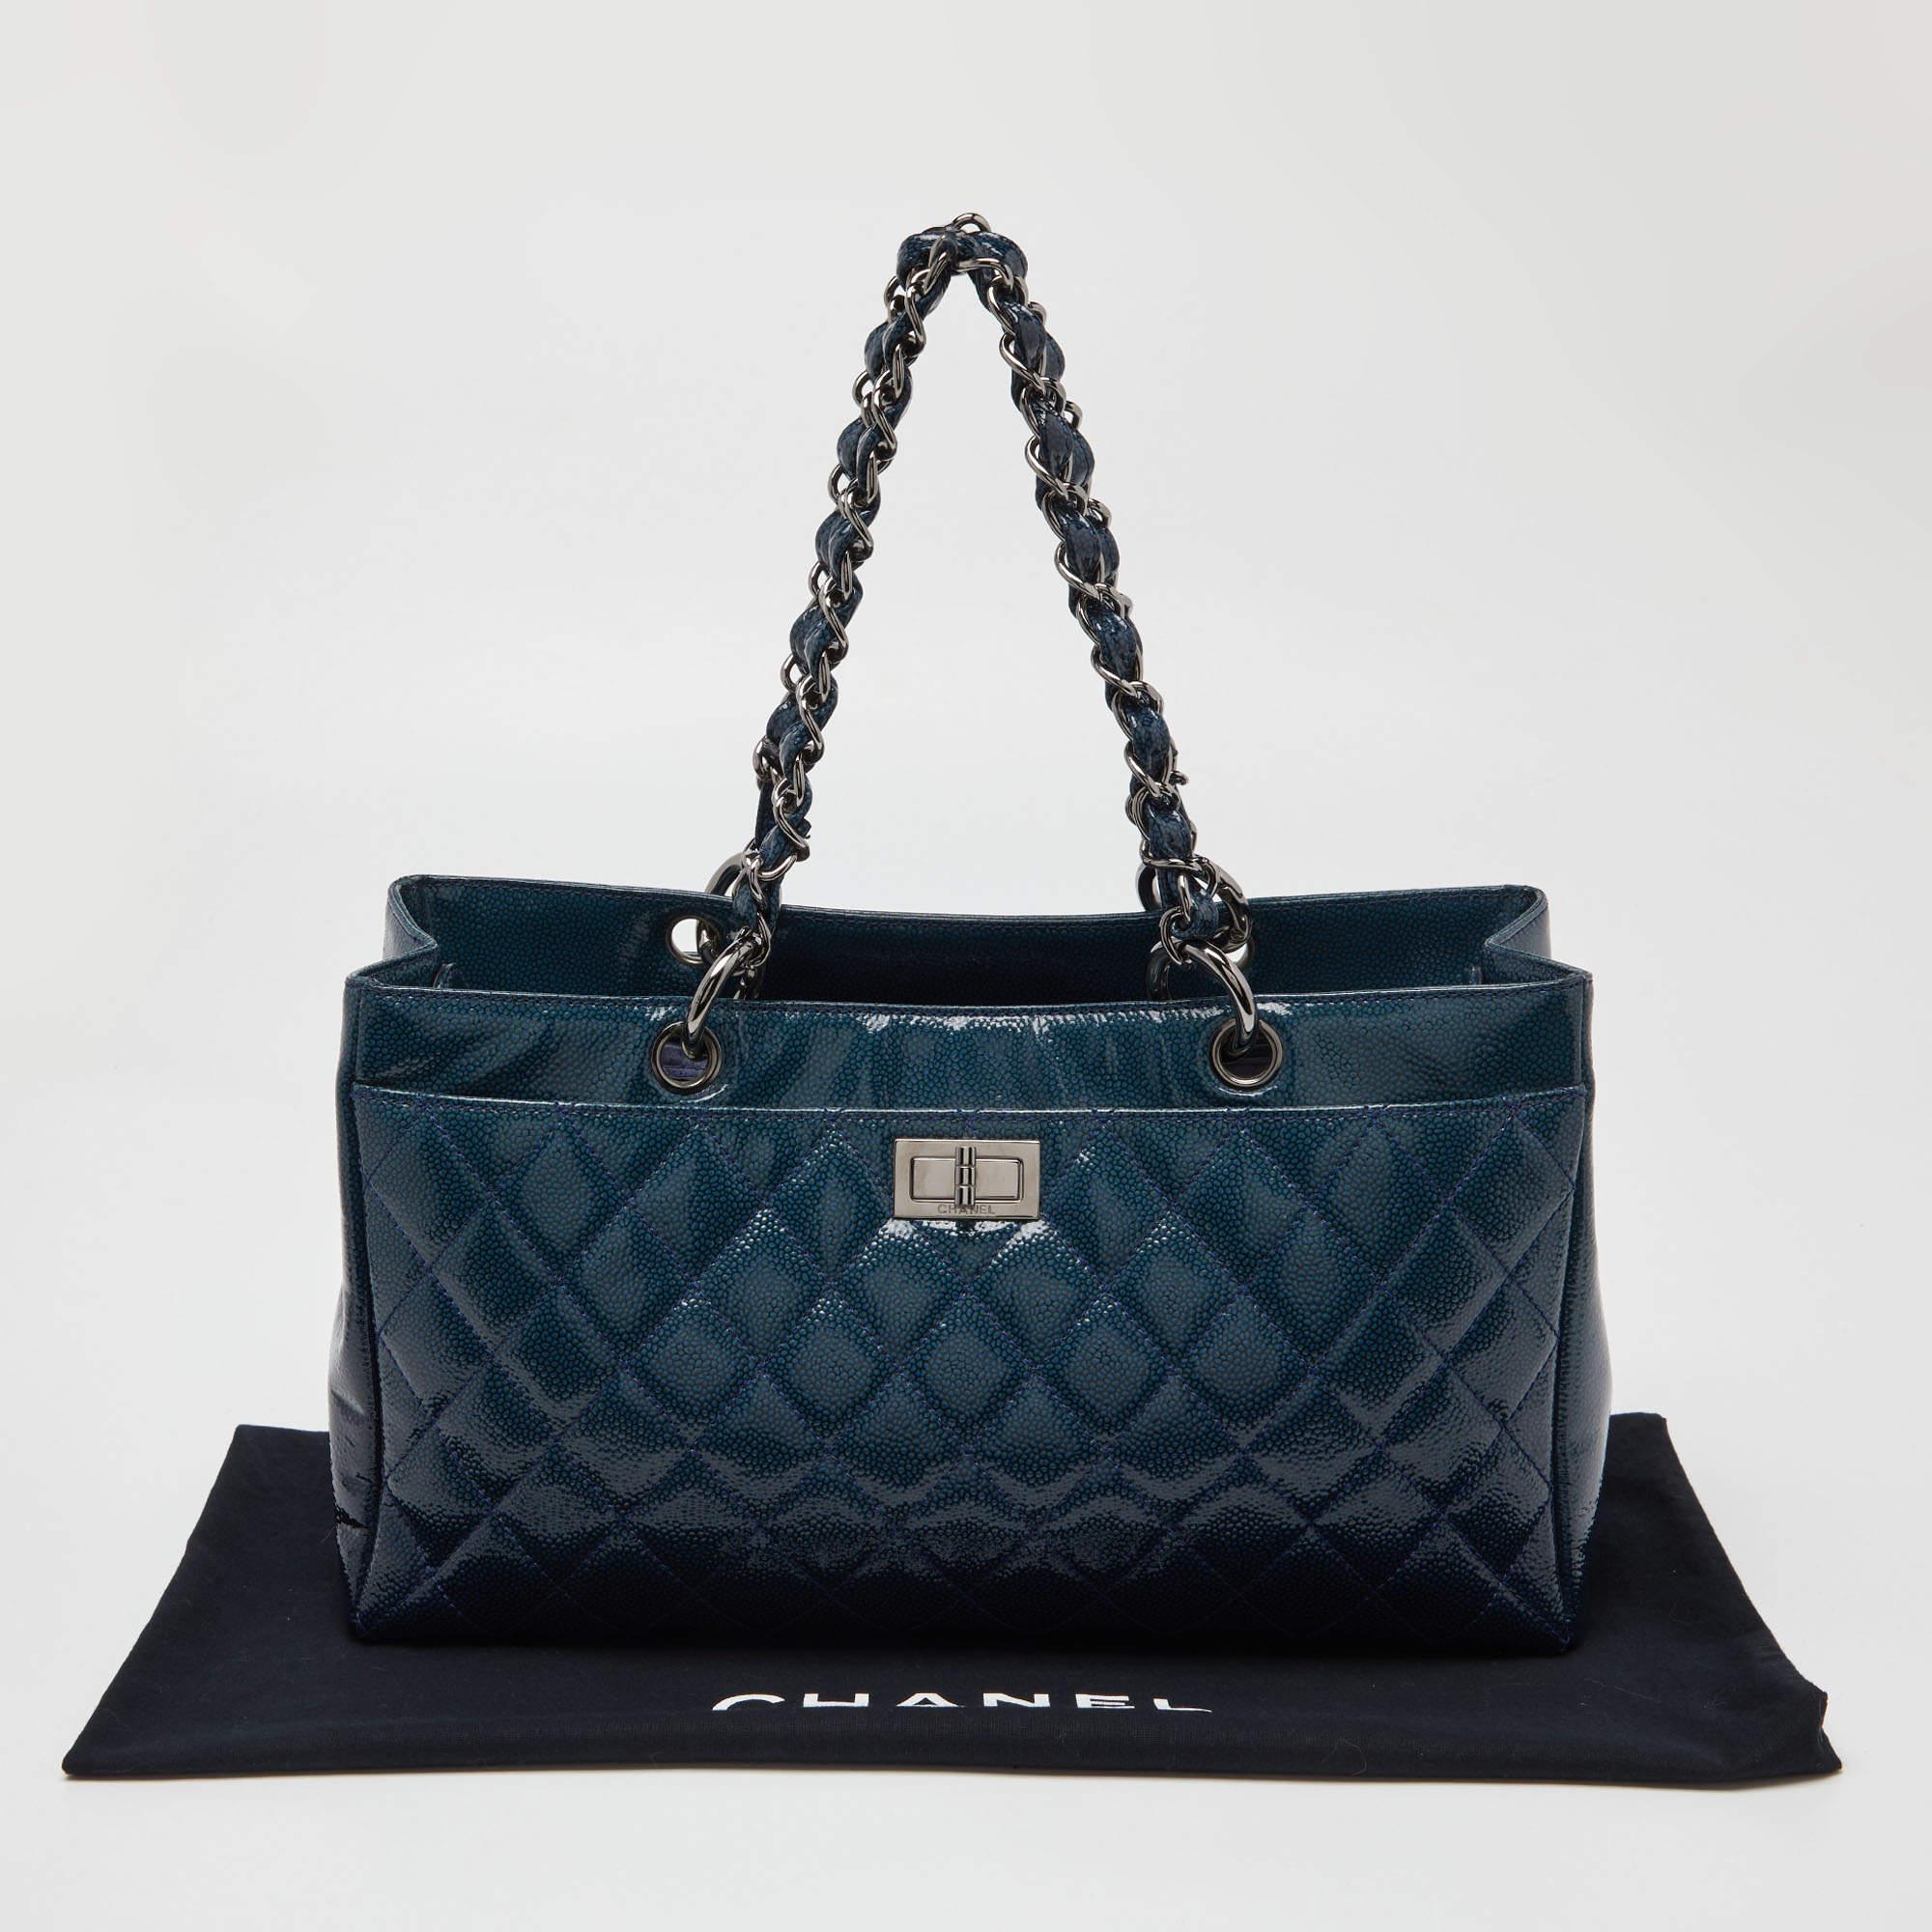 Chanel Blue Diamond Shine Quilted Leather Reissue Tote 3